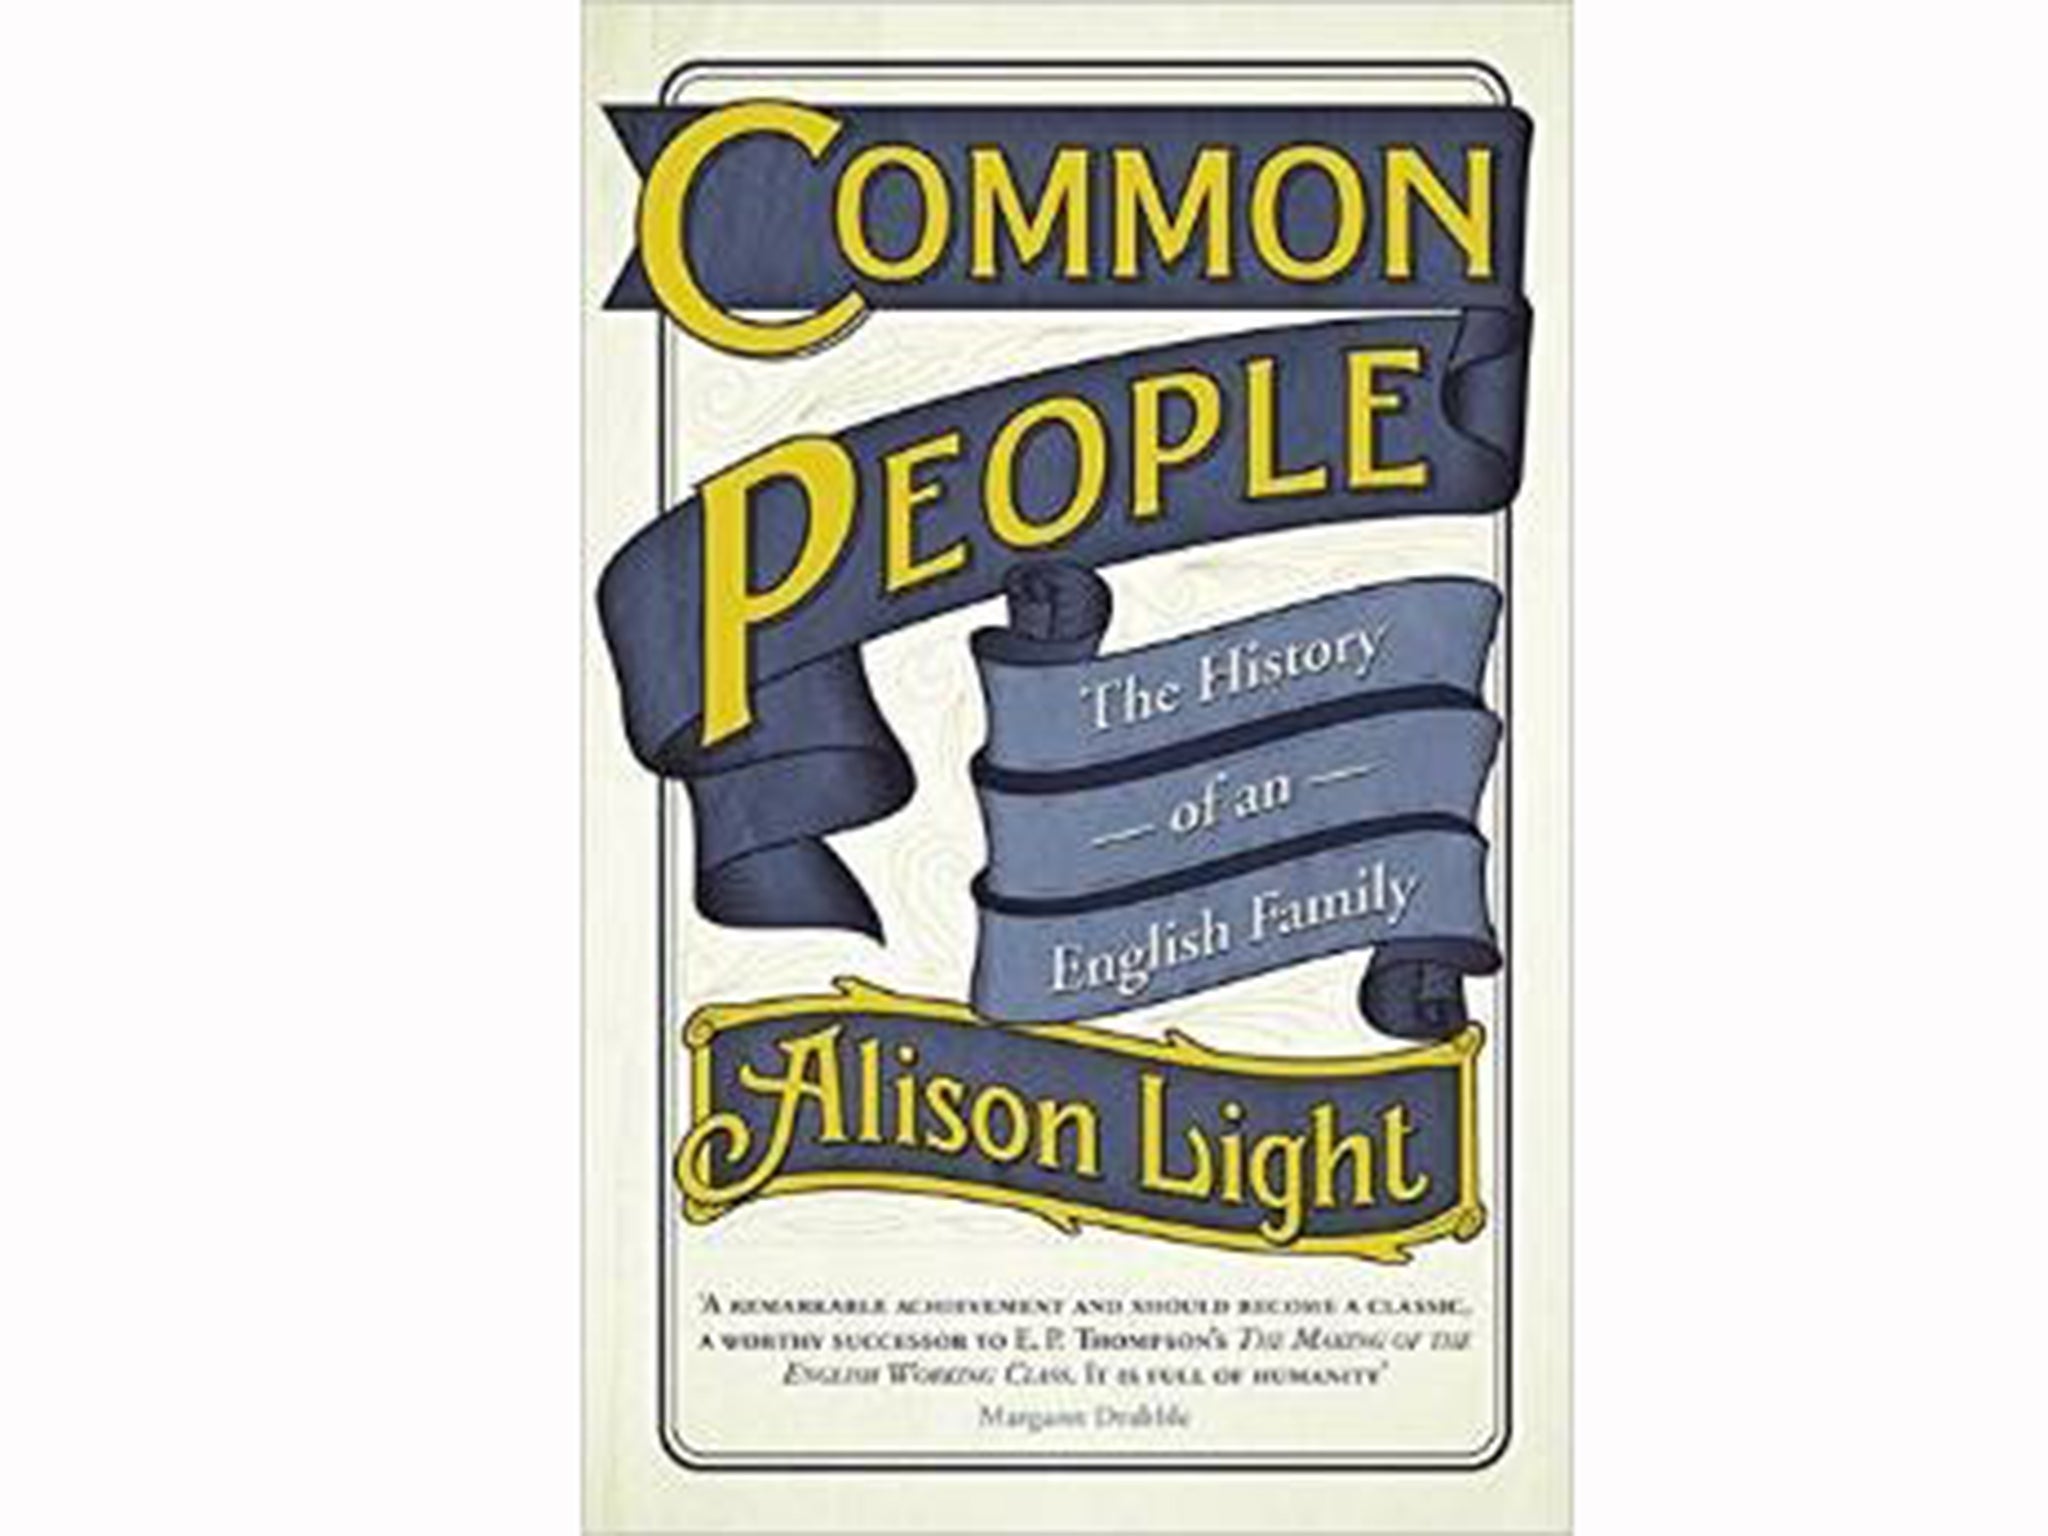 Alison Light's 'Common People: The History of an English Family'